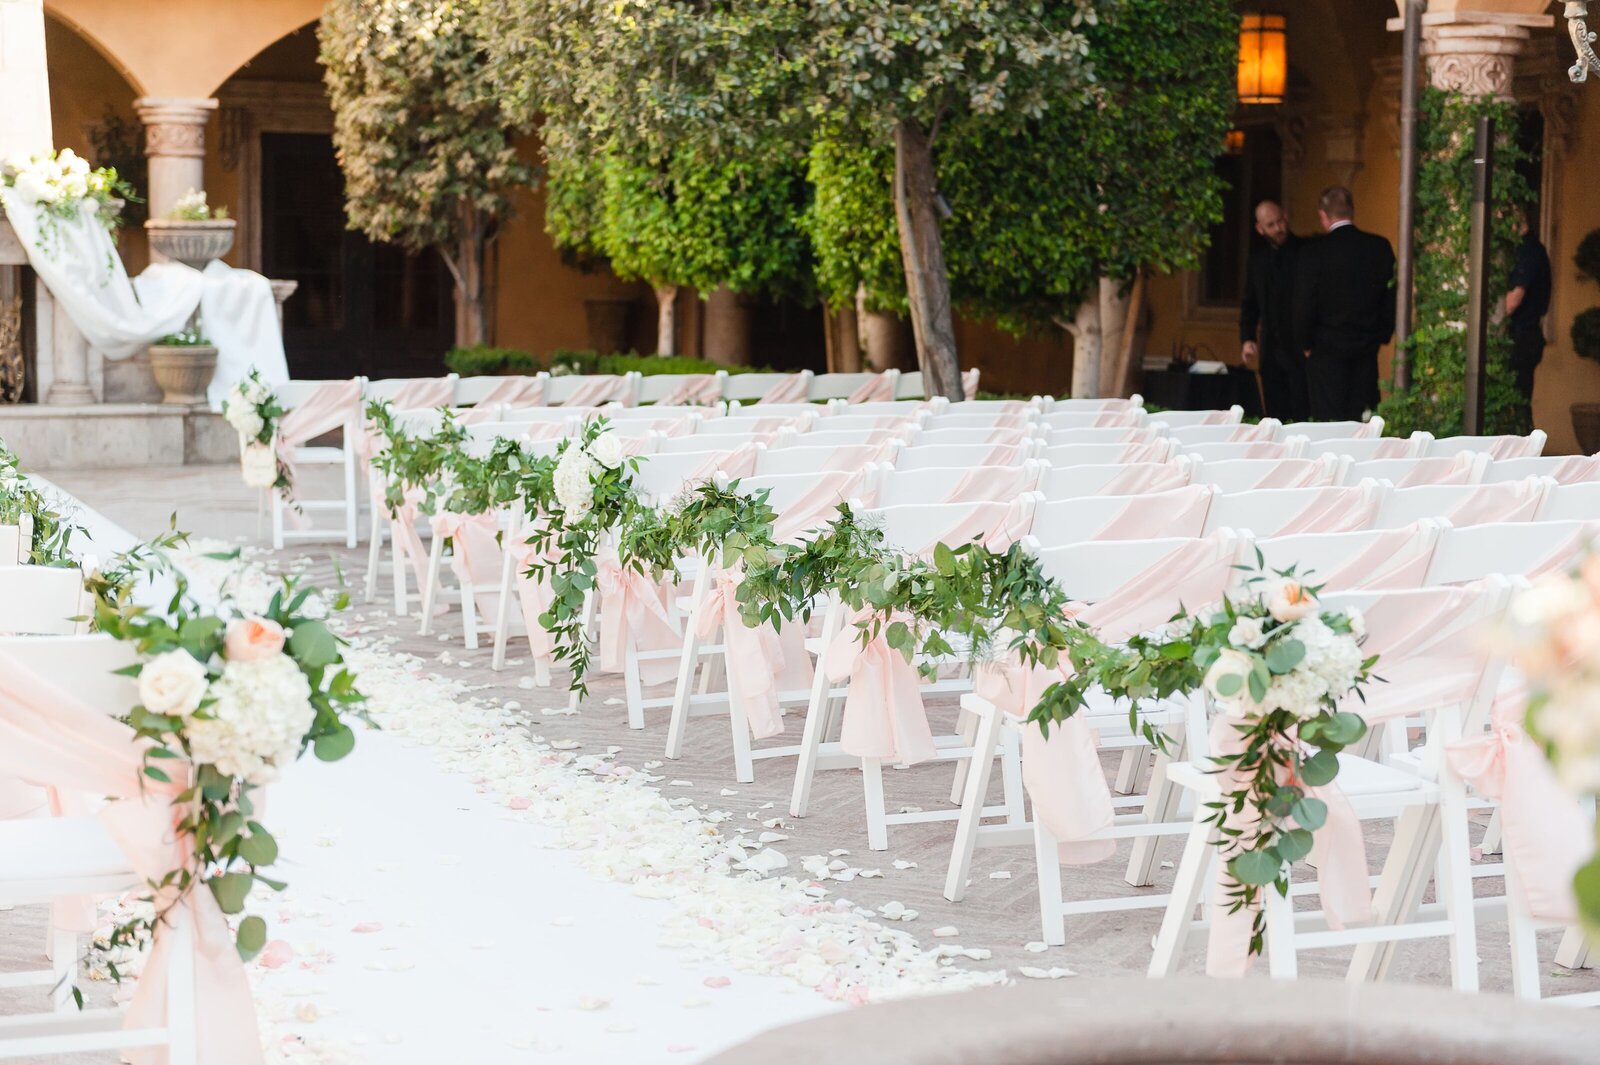 Villa Siena ceremony setting with white chairs draped with green swag and blush sashes.